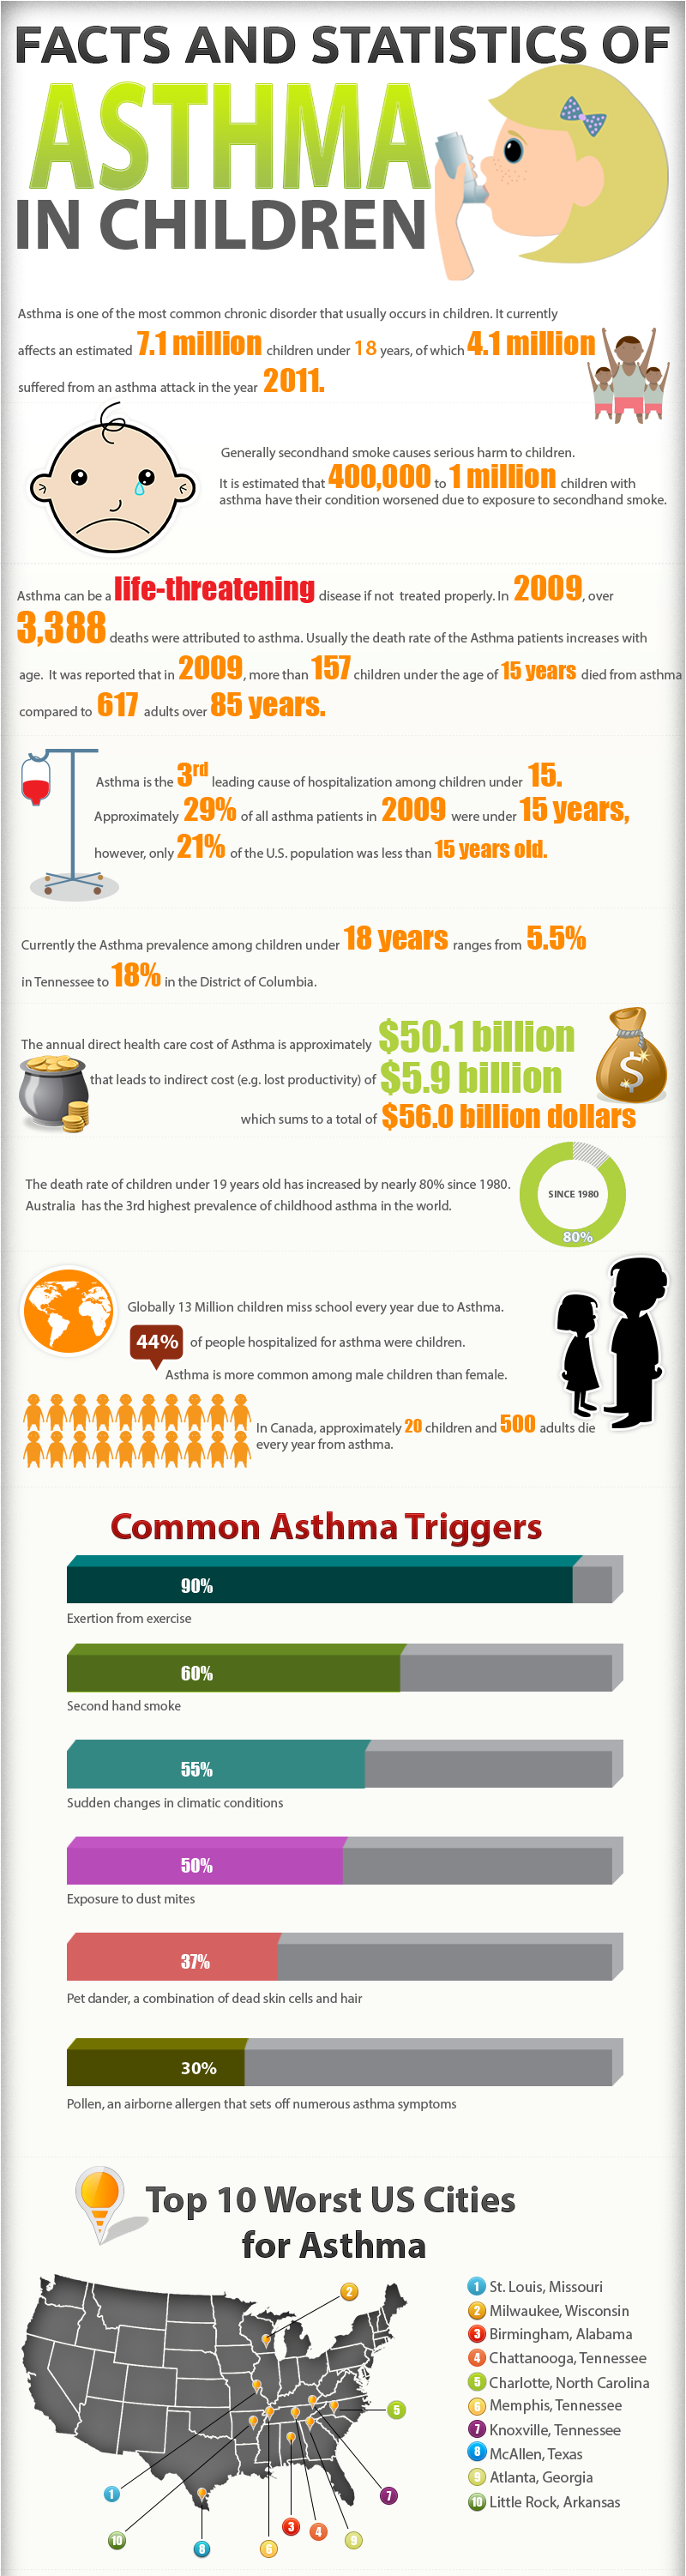 Facts-and-Statistics-of-Asthma-in-Children